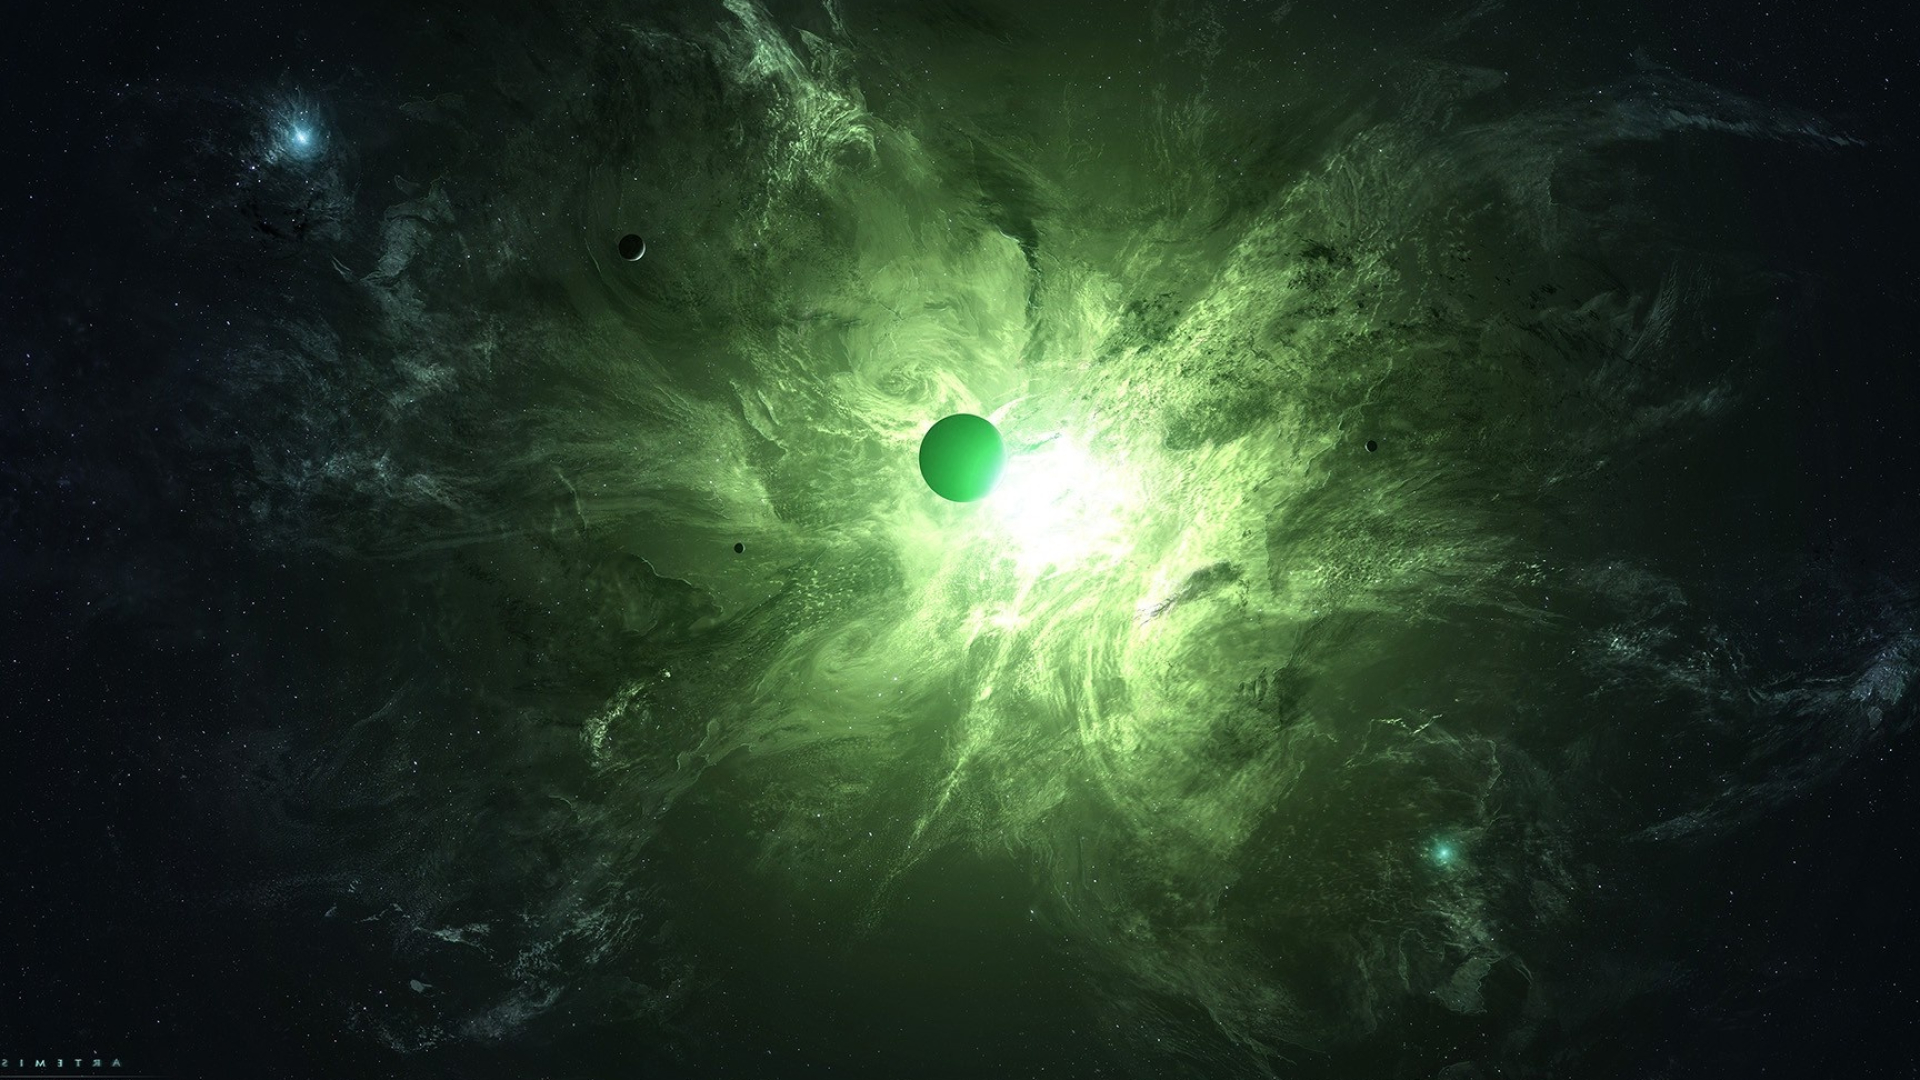 Green Nebula: A group of planets in deep space, The interstellar radiation field. 1920x1080 Full HD Wallpaper.